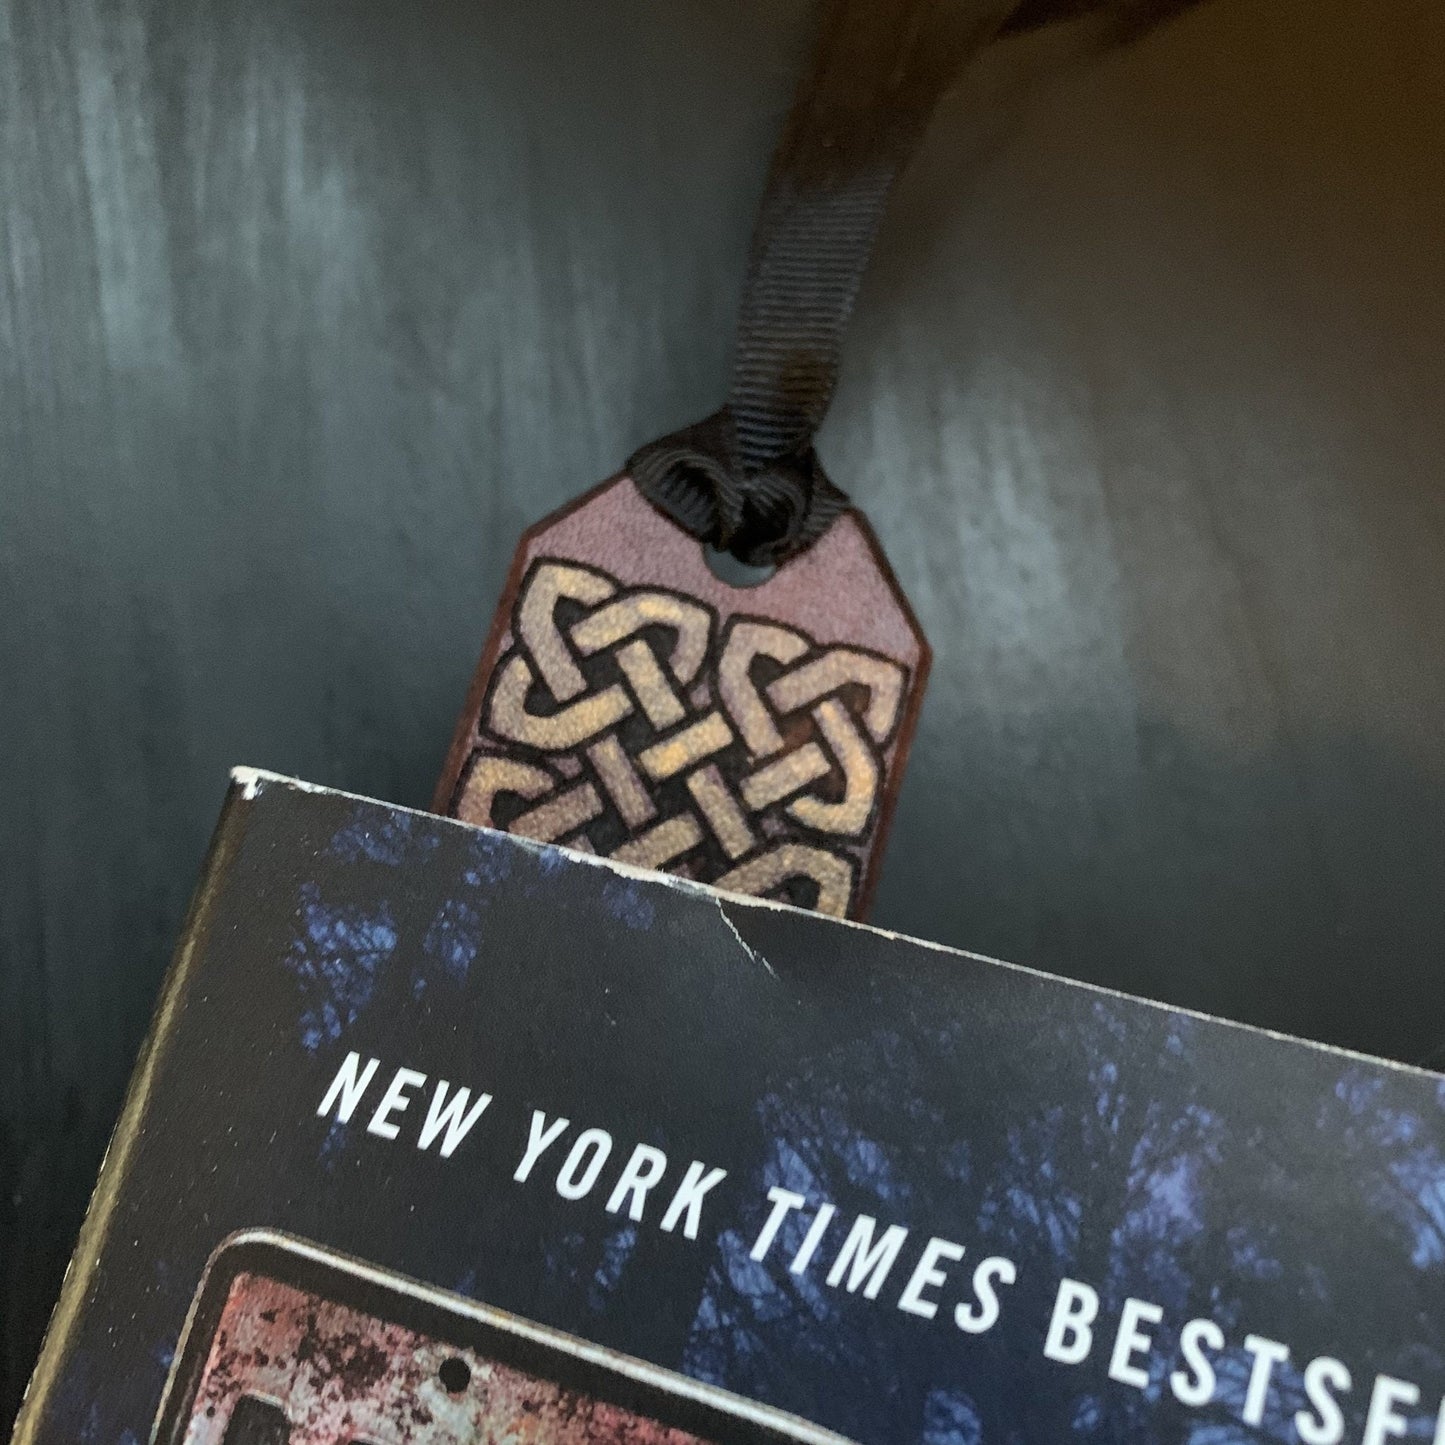 Father's Day Personalized Celtic Knot Leather Bookmark